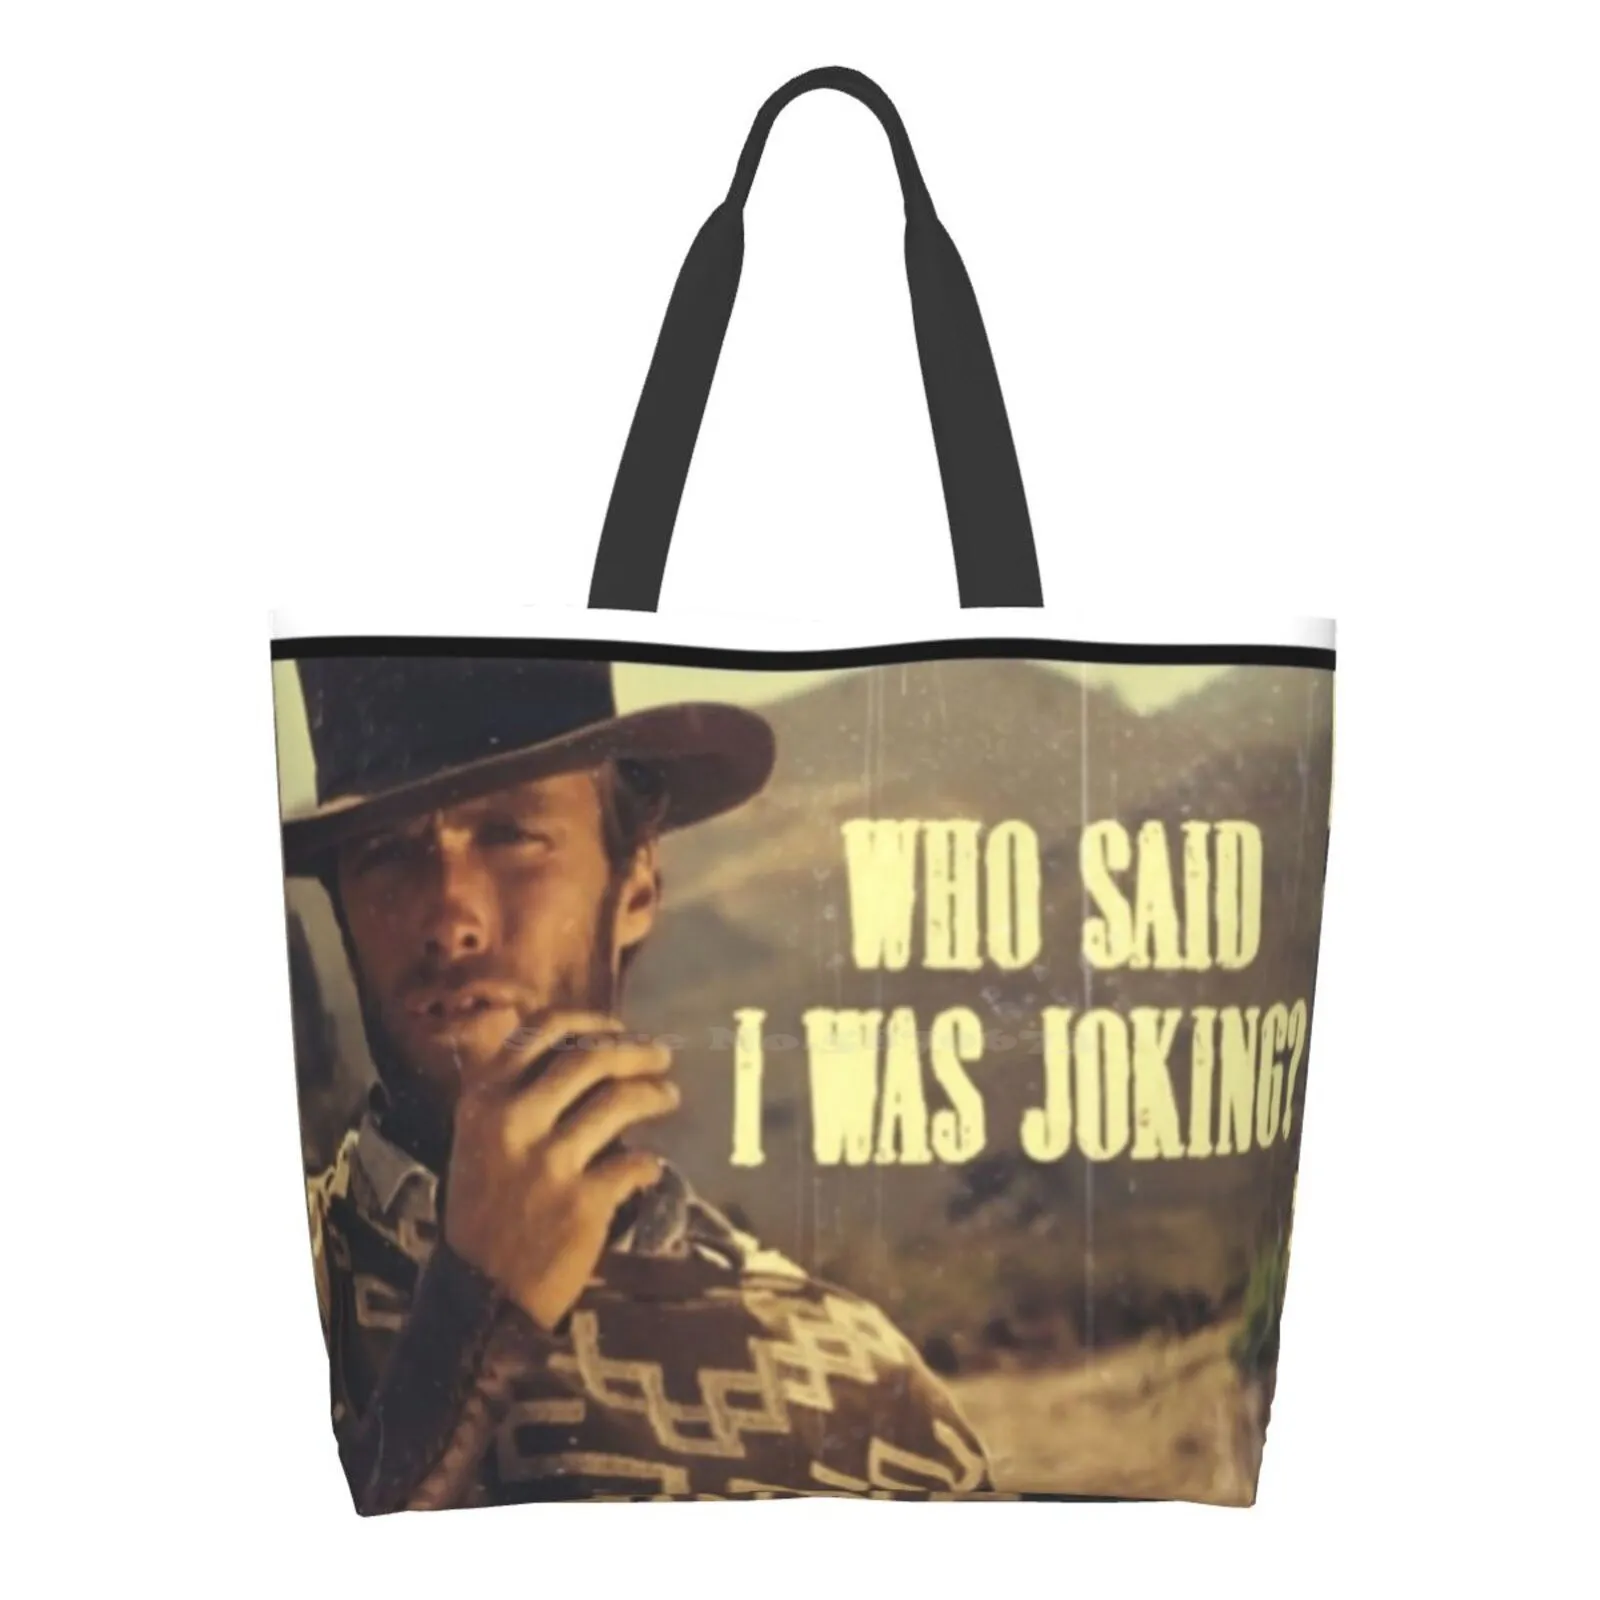 

Clint Eastwood - Who Said I Was Joking Casual Handbag Tote Bag Reusable Large Capacity Clint Eastwood Movie Movies Film